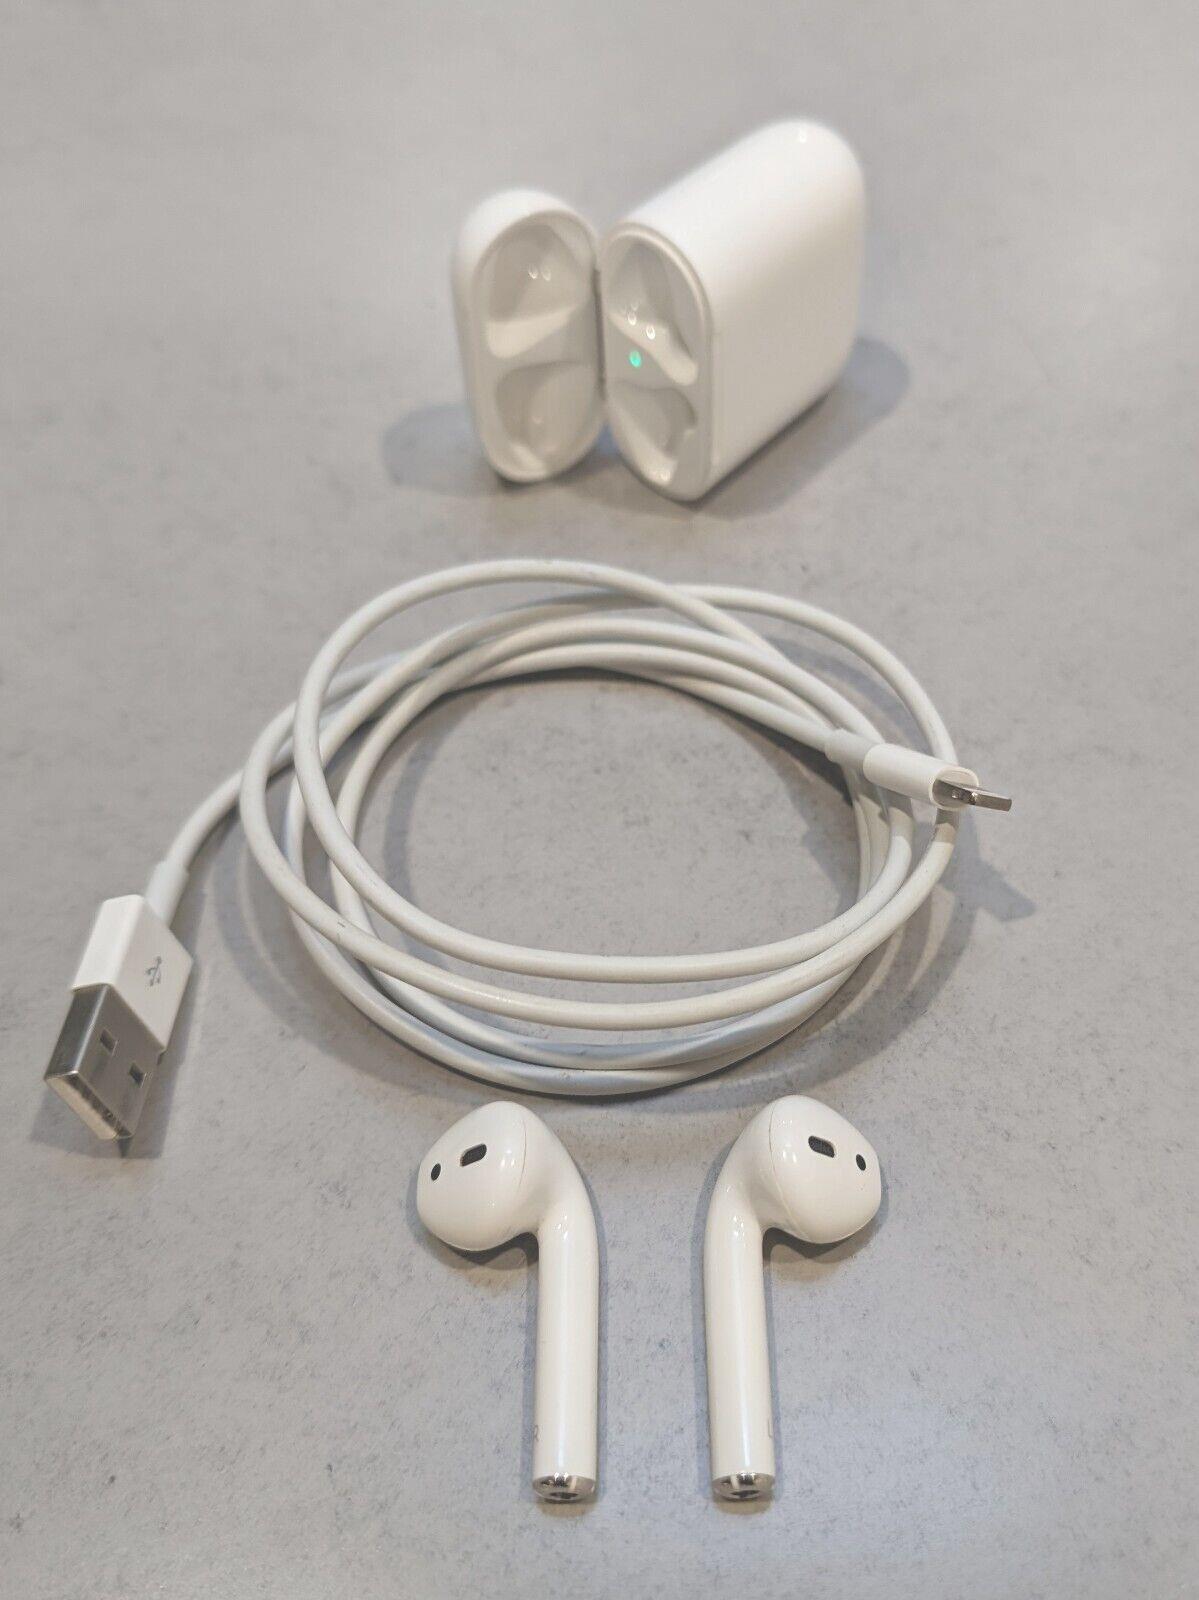 Apple Airpods 2nd Generation With Charging Case - White A2031